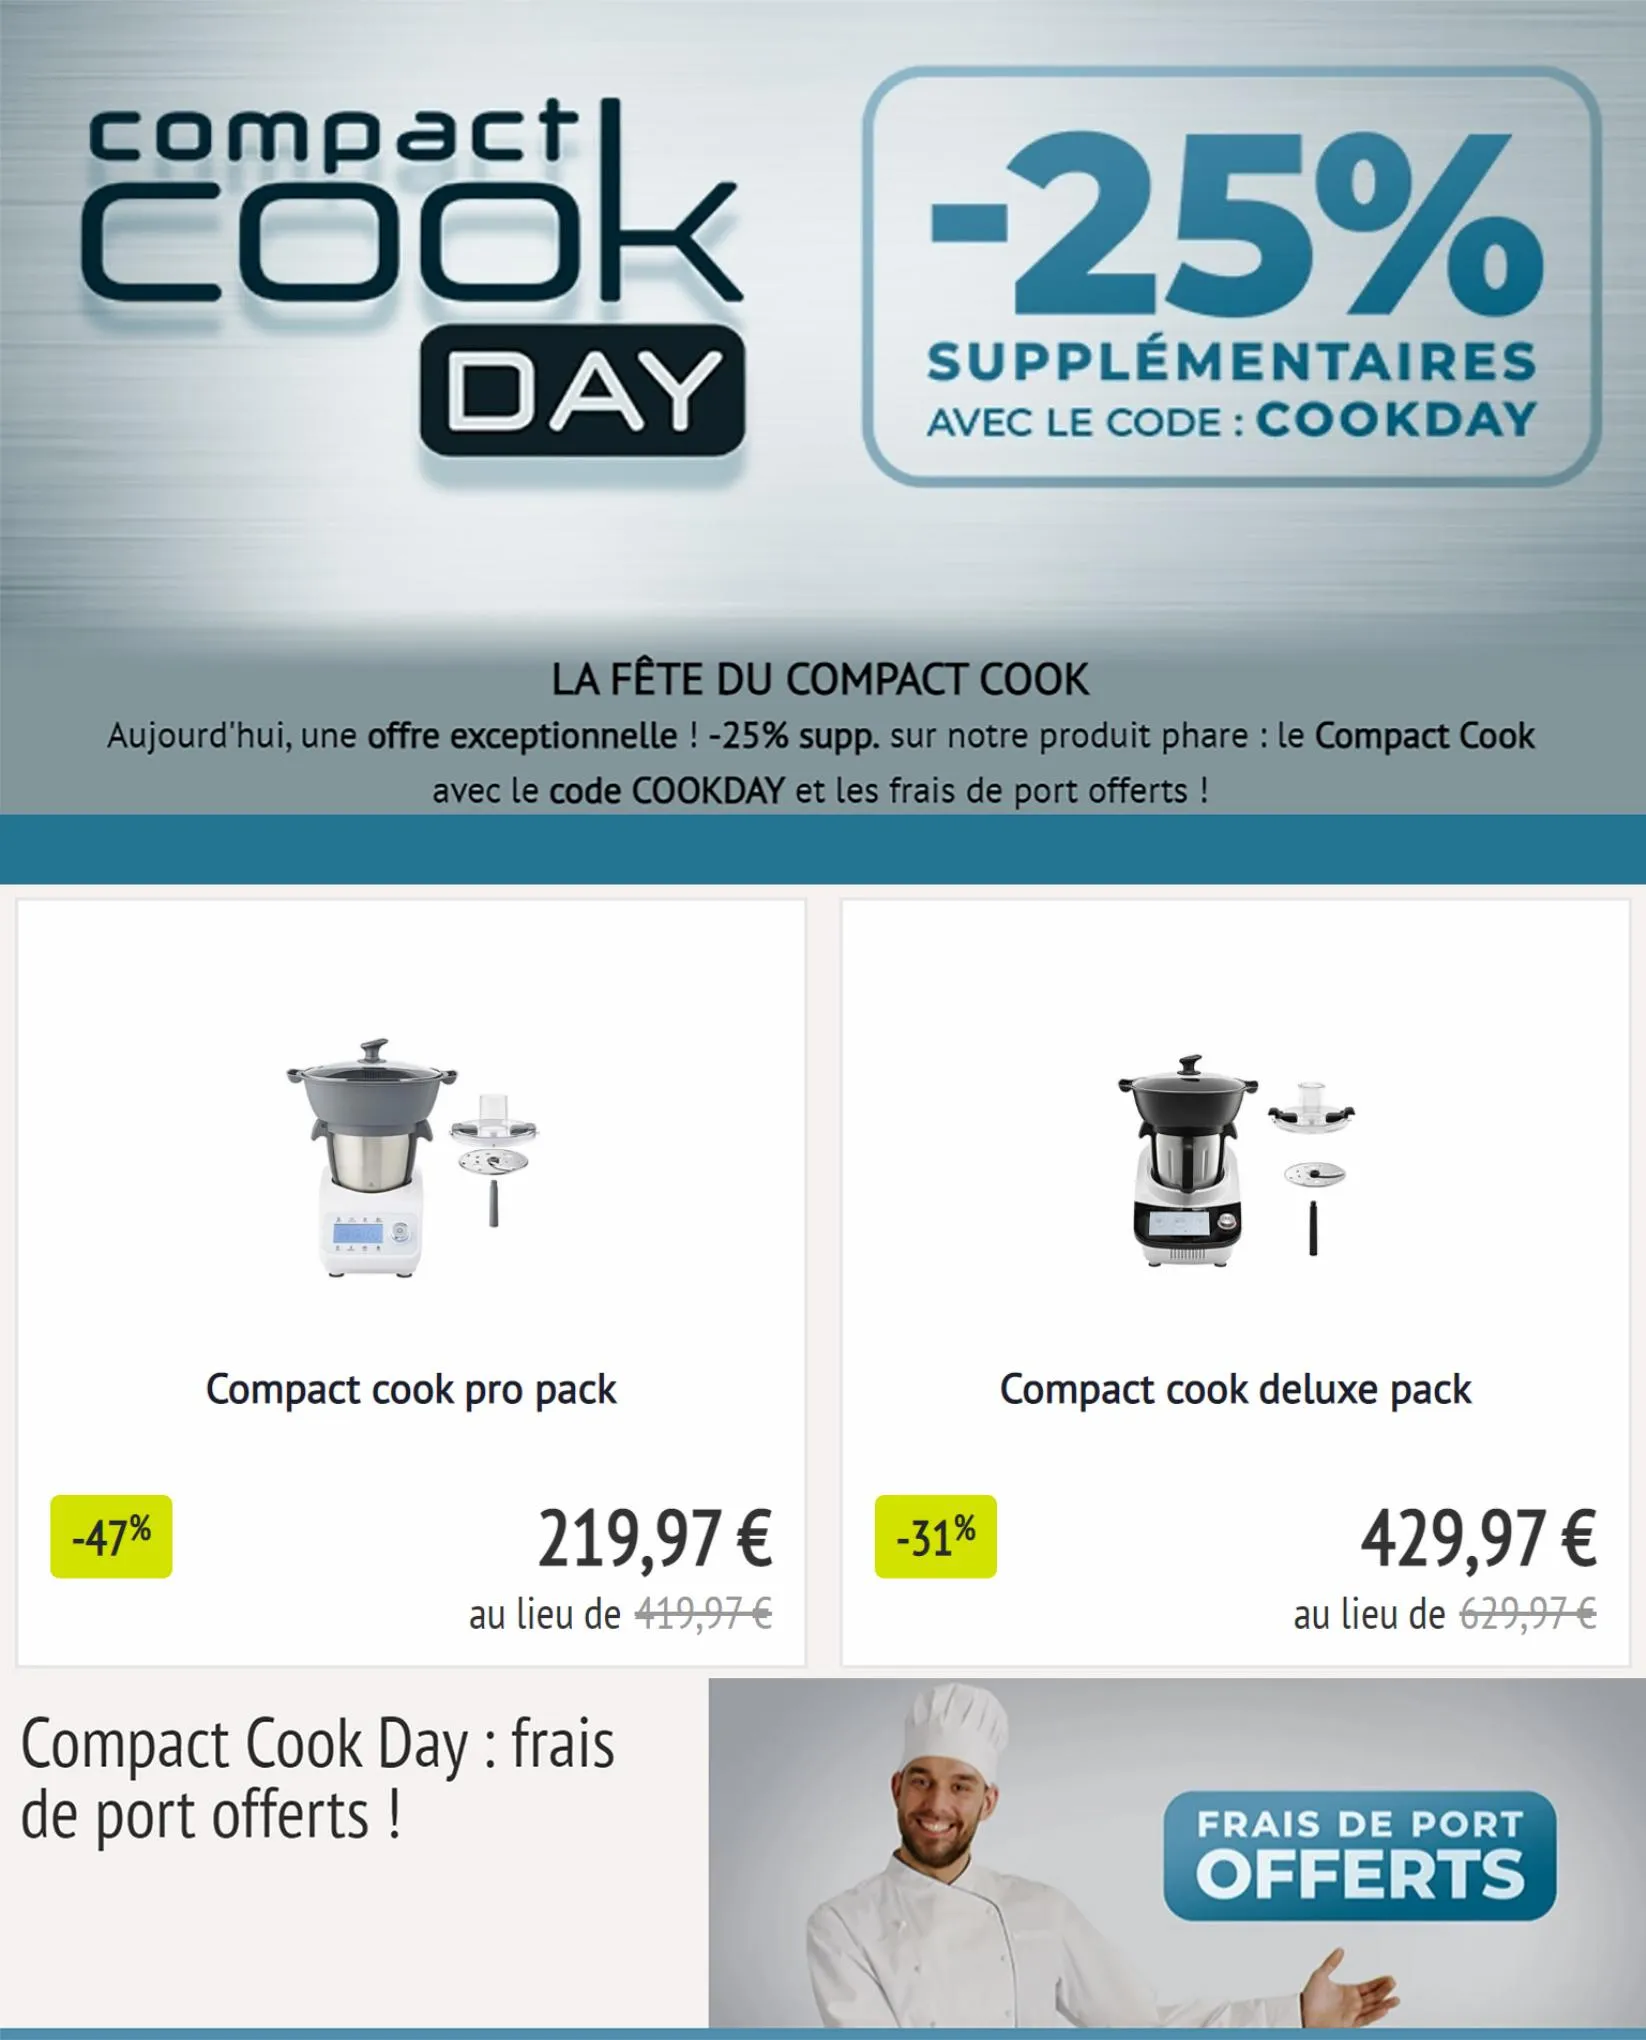 Catalogue COOKDAY -25% supplémentaires!, page 00003